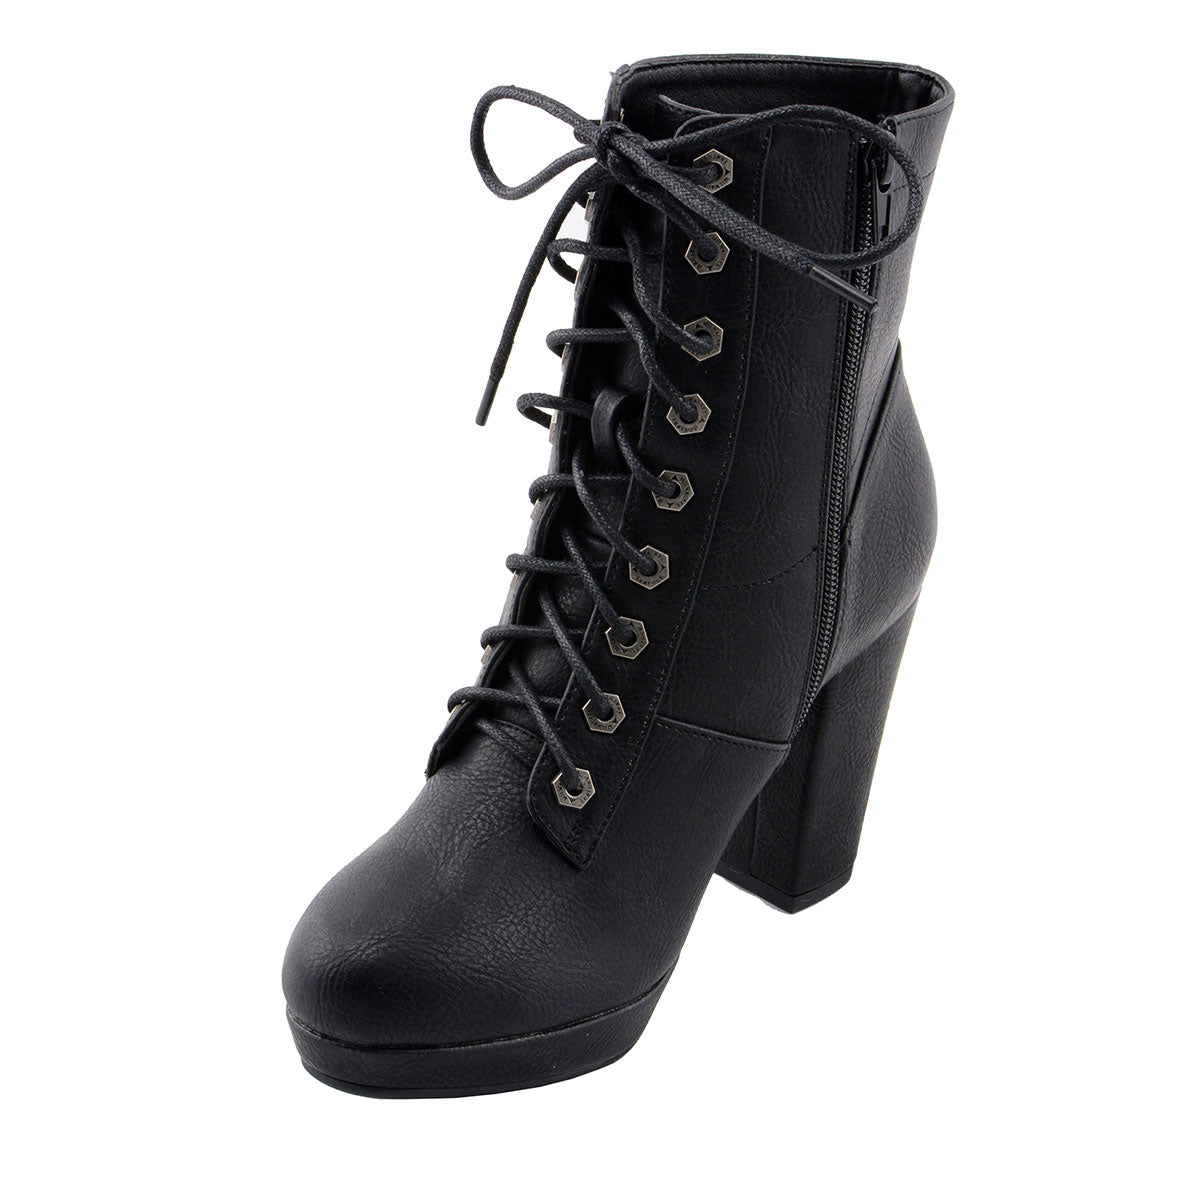 Milwaukee Leather MBL9418 Women's Black Lace-Up Fashion Boots with Studded Accents and Platform Heel